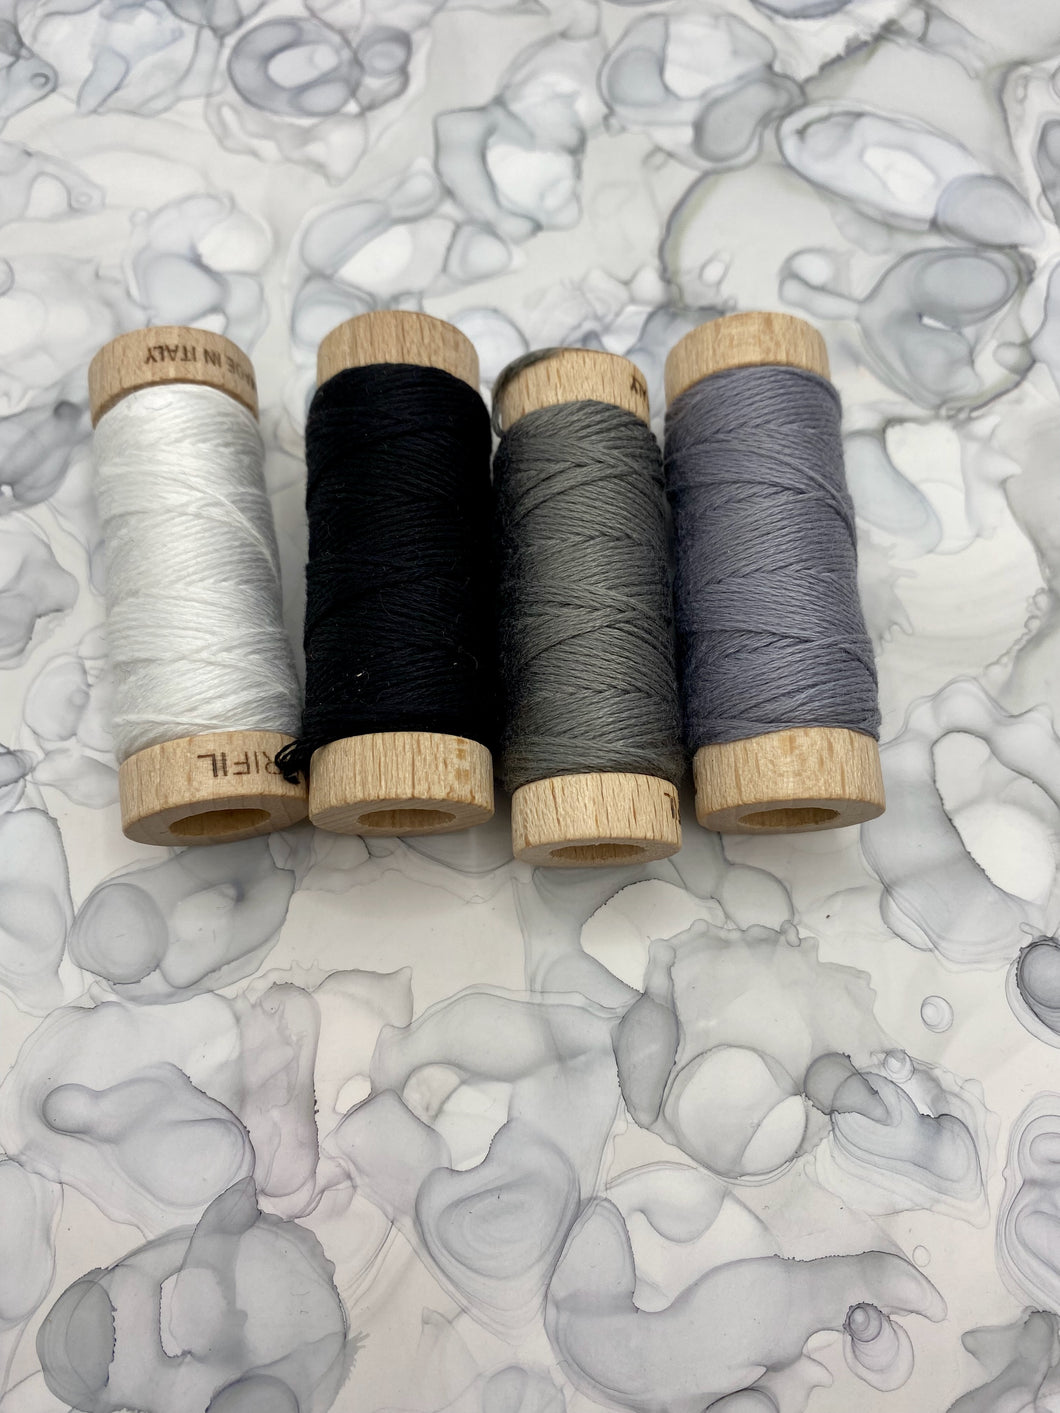 Aurifil Greys, White, and Black Set of four 6-strand embroidery floss spools